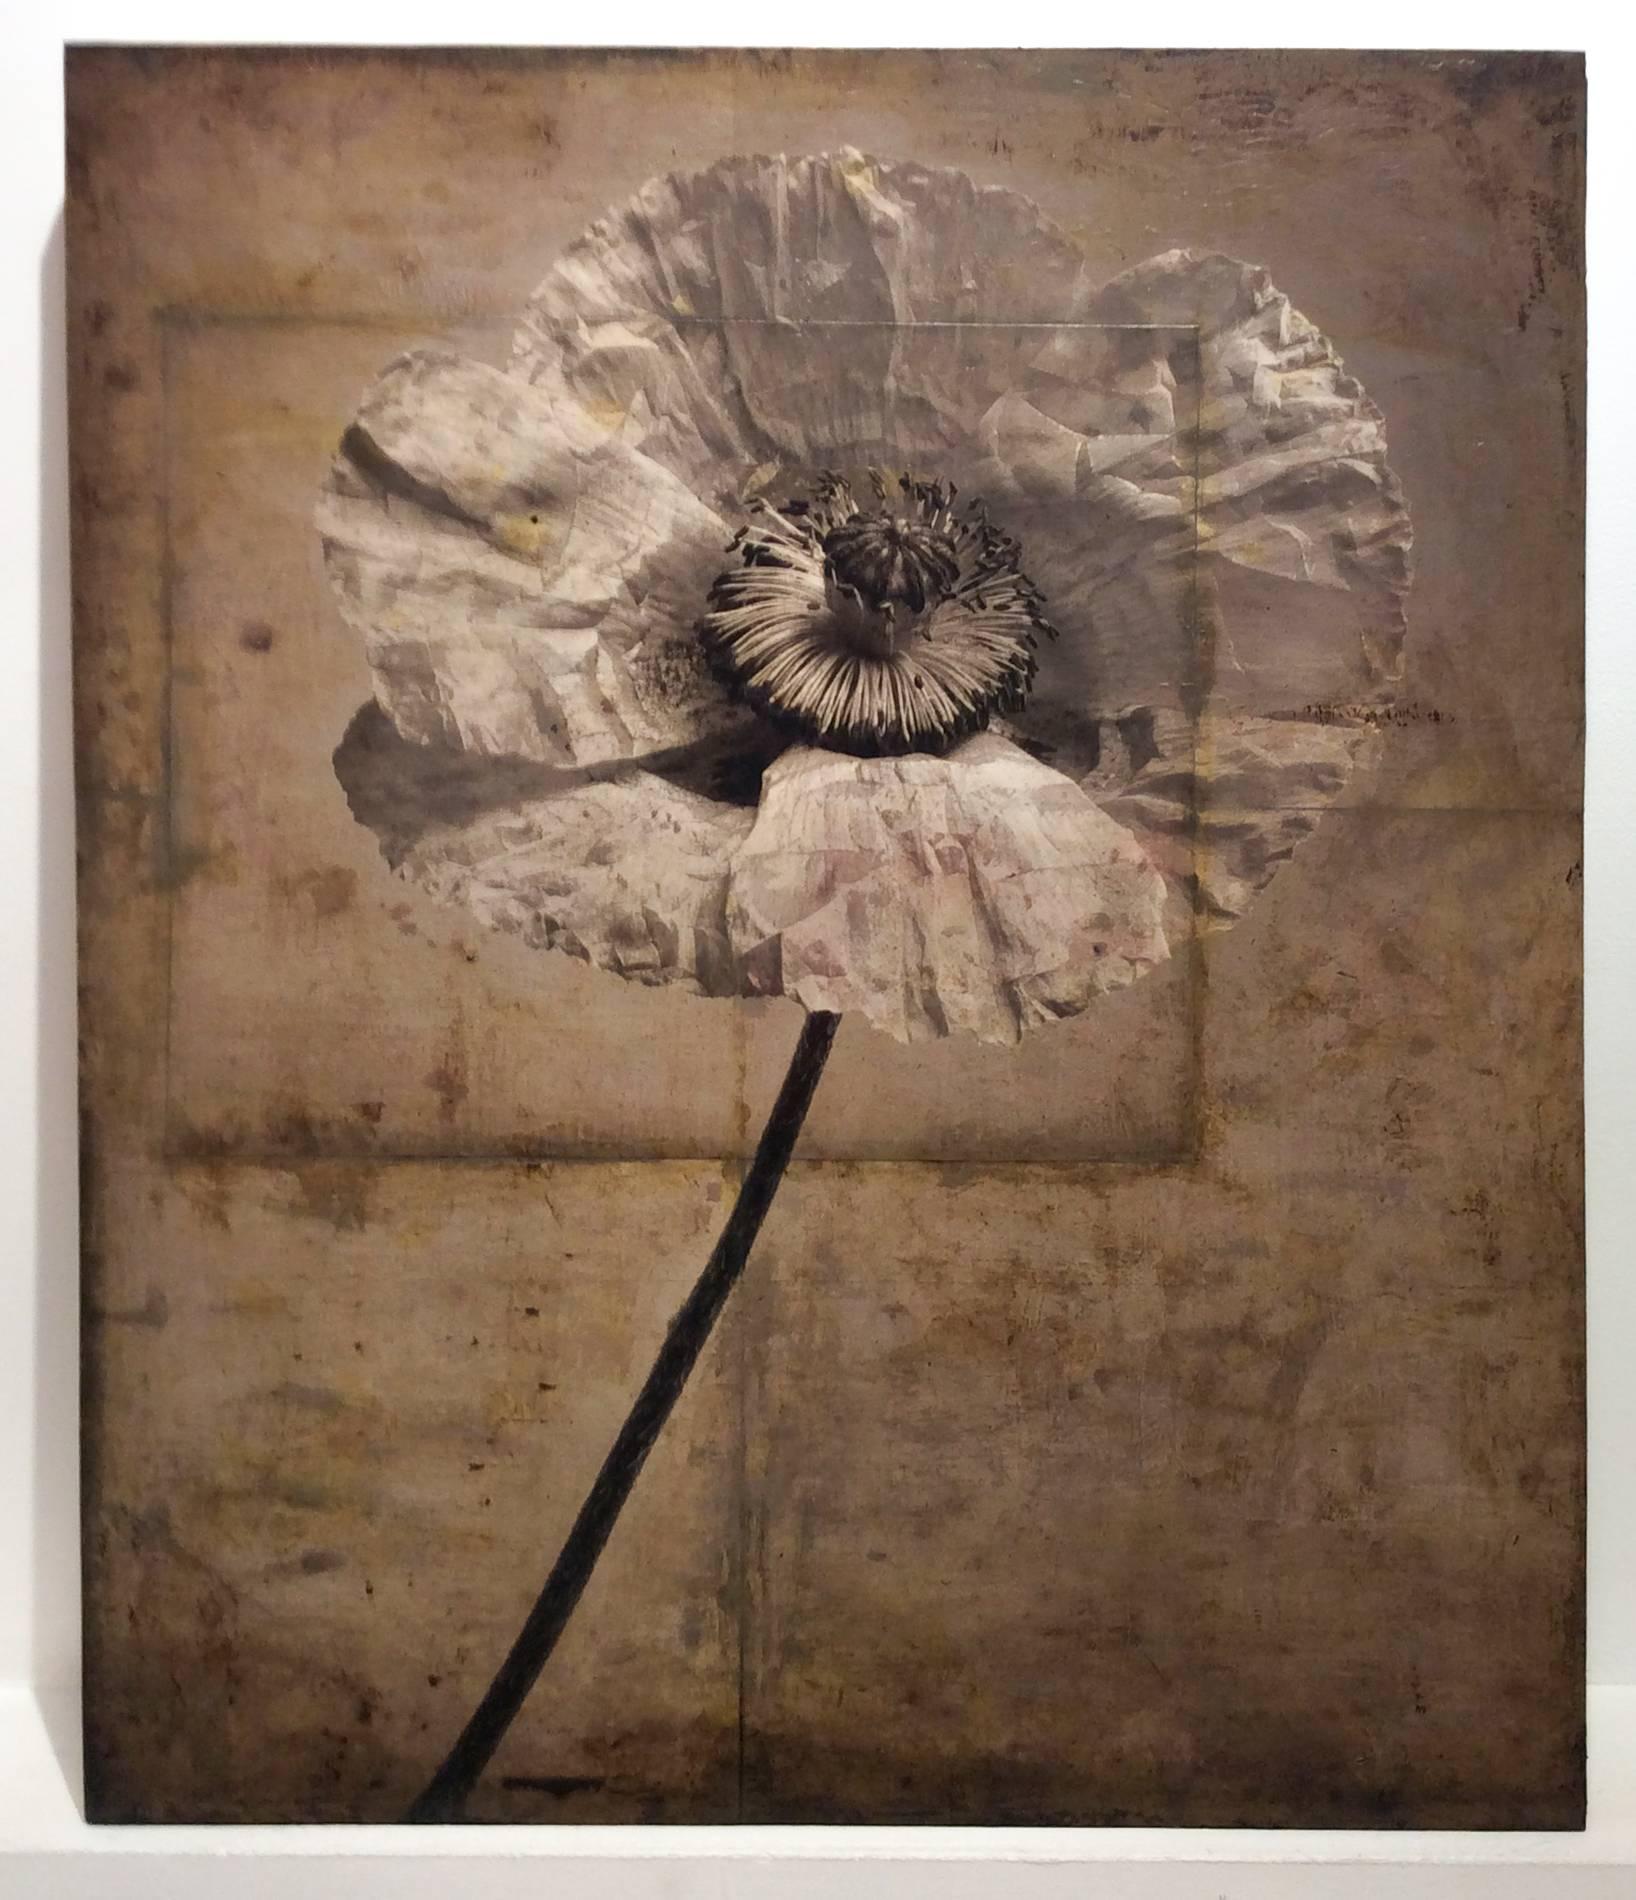 Poppy #4 (Modern, Sepia Toned Photo Collage on Wood of Single Poppy Flower) - Photograph by David Seiler